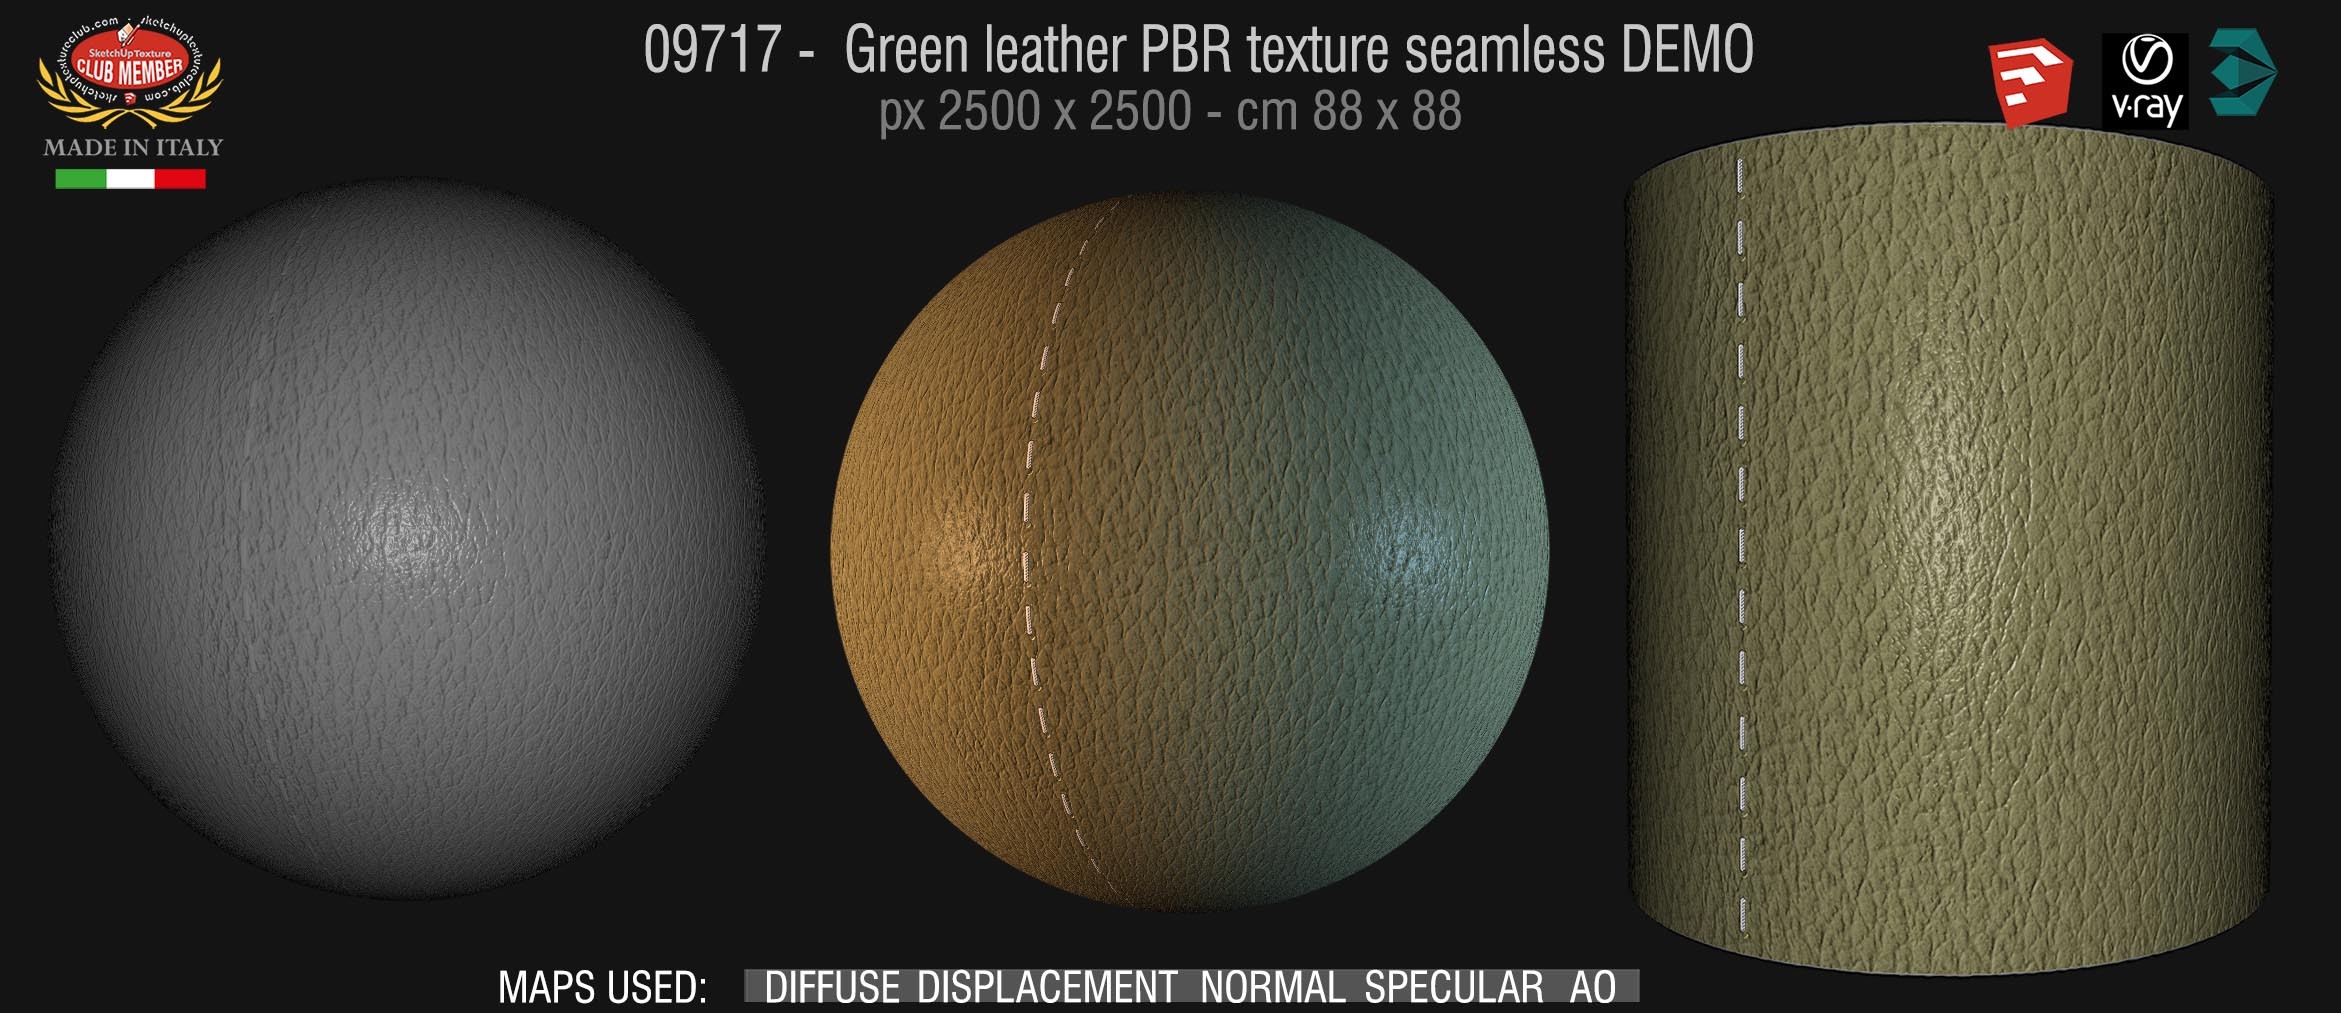 09717 Green leather PBR texture seamless DEMO